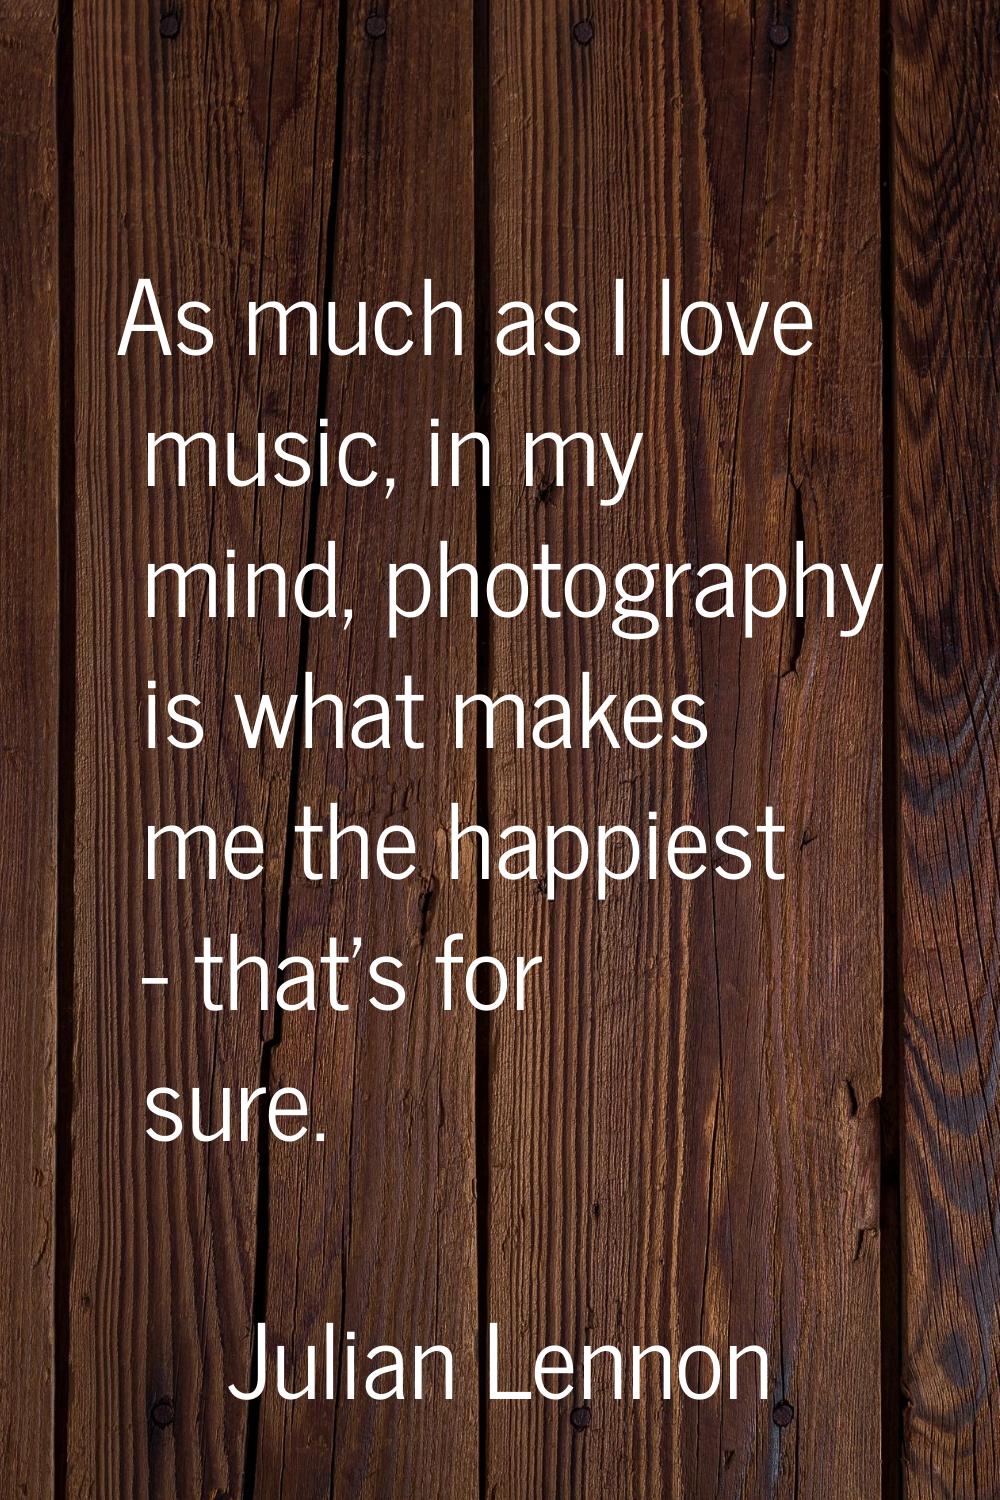 As much as I love music, in my mind, photography is what makes me the happiest - that's for sure.